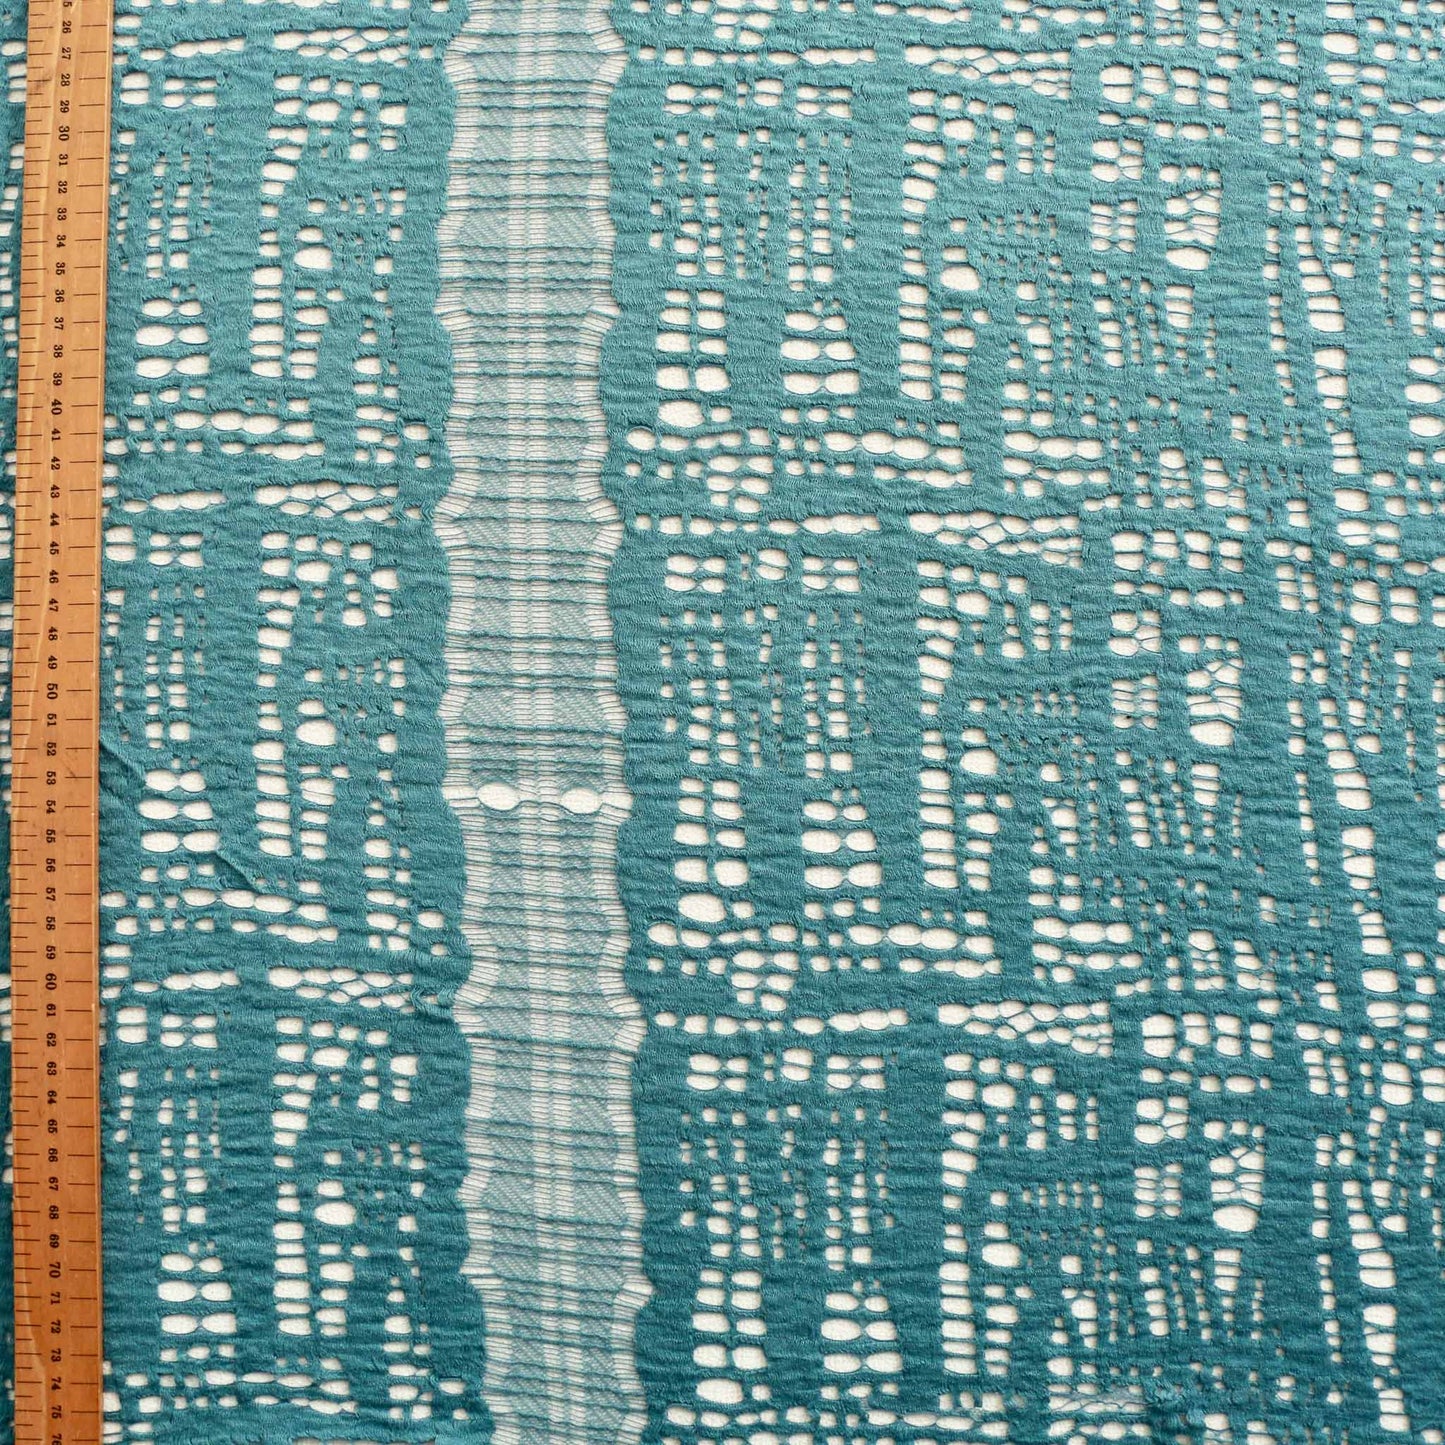 metre turquoise dressmaking lace fabric with embroidery effect and abstract design